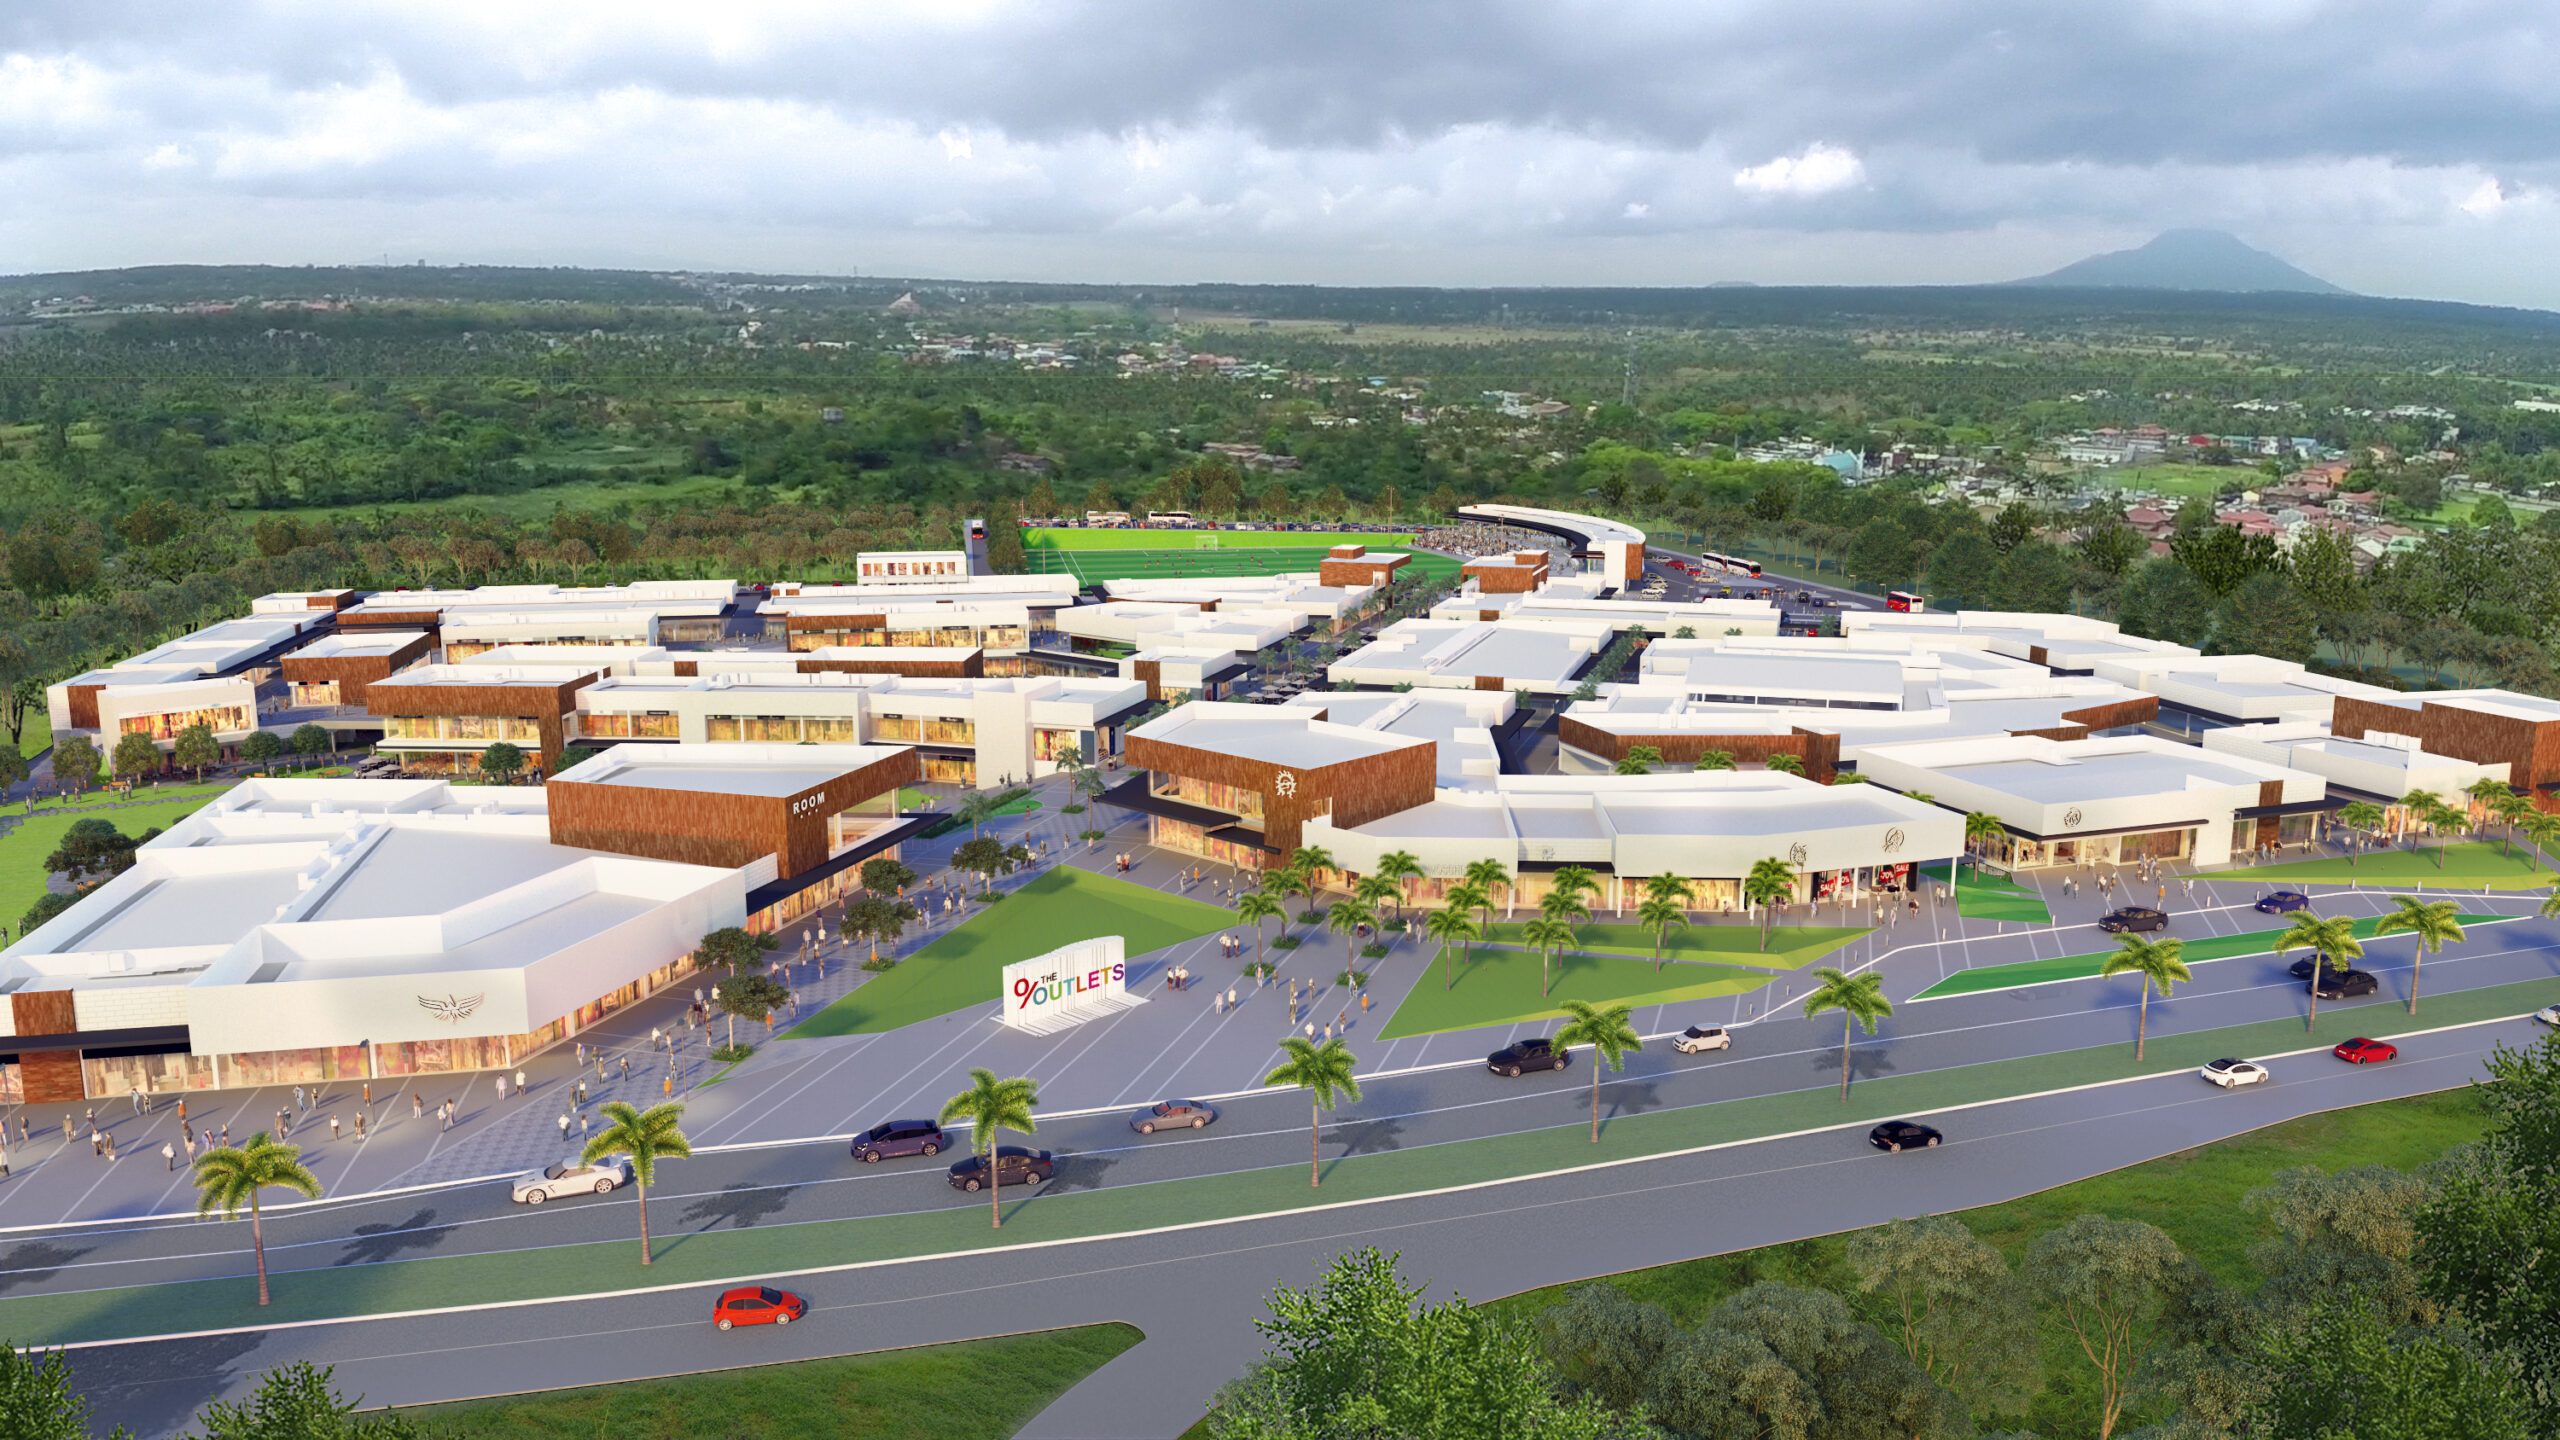 AboitizLand to open The Outlets discount mall in Batangas next year